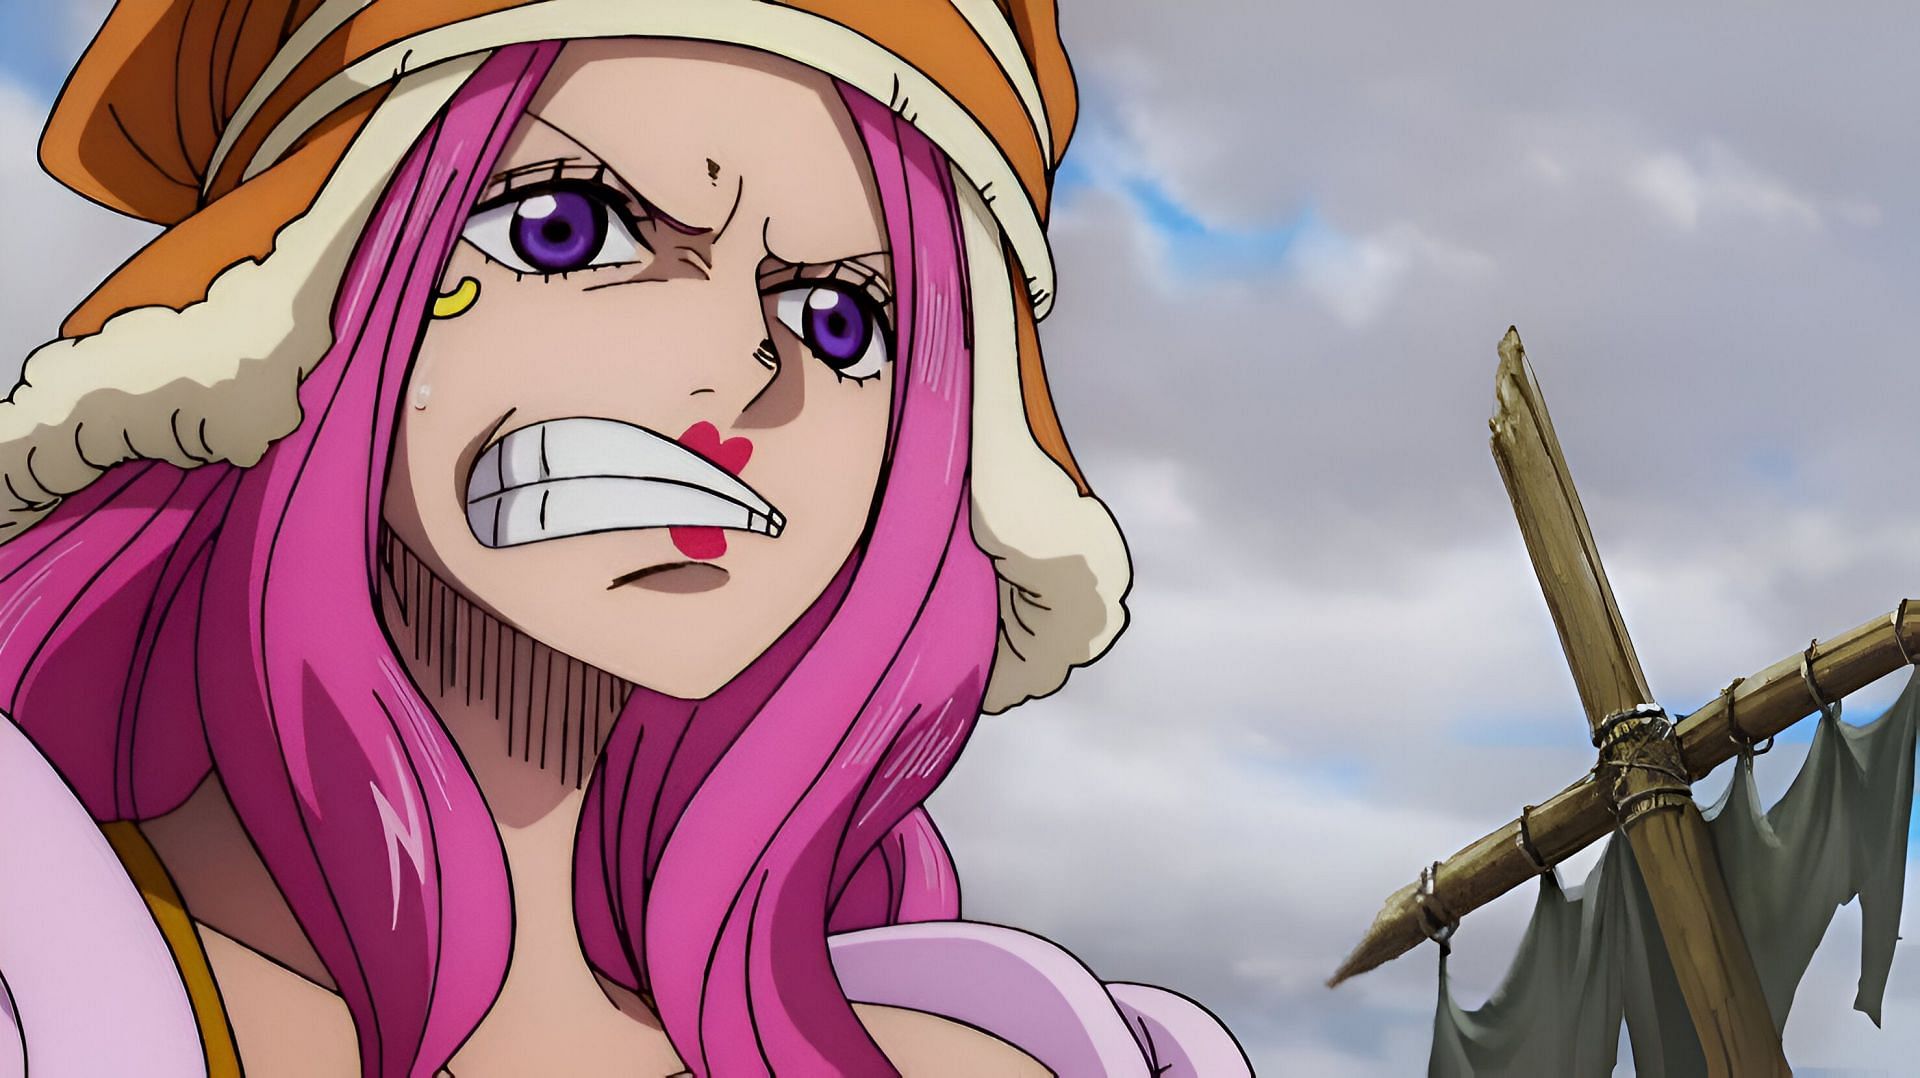 Bonney as seen in the anime (Image via Toei Animation)